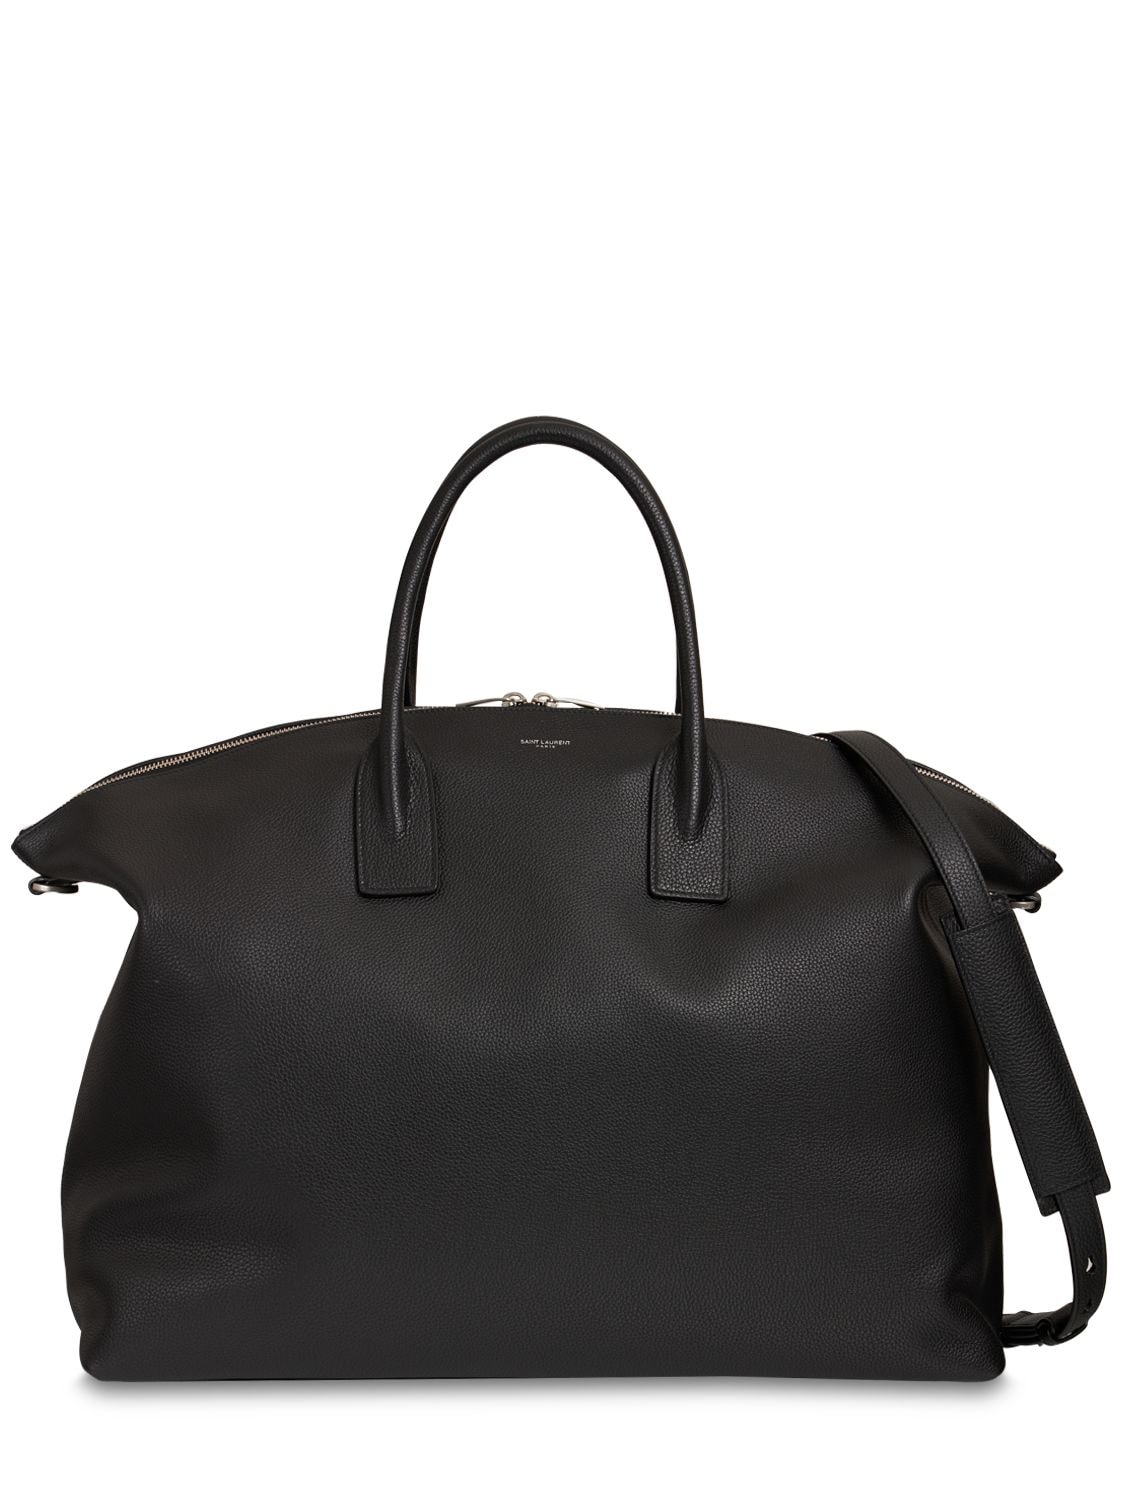 Image of Giant Bowling Leather Tote Bag